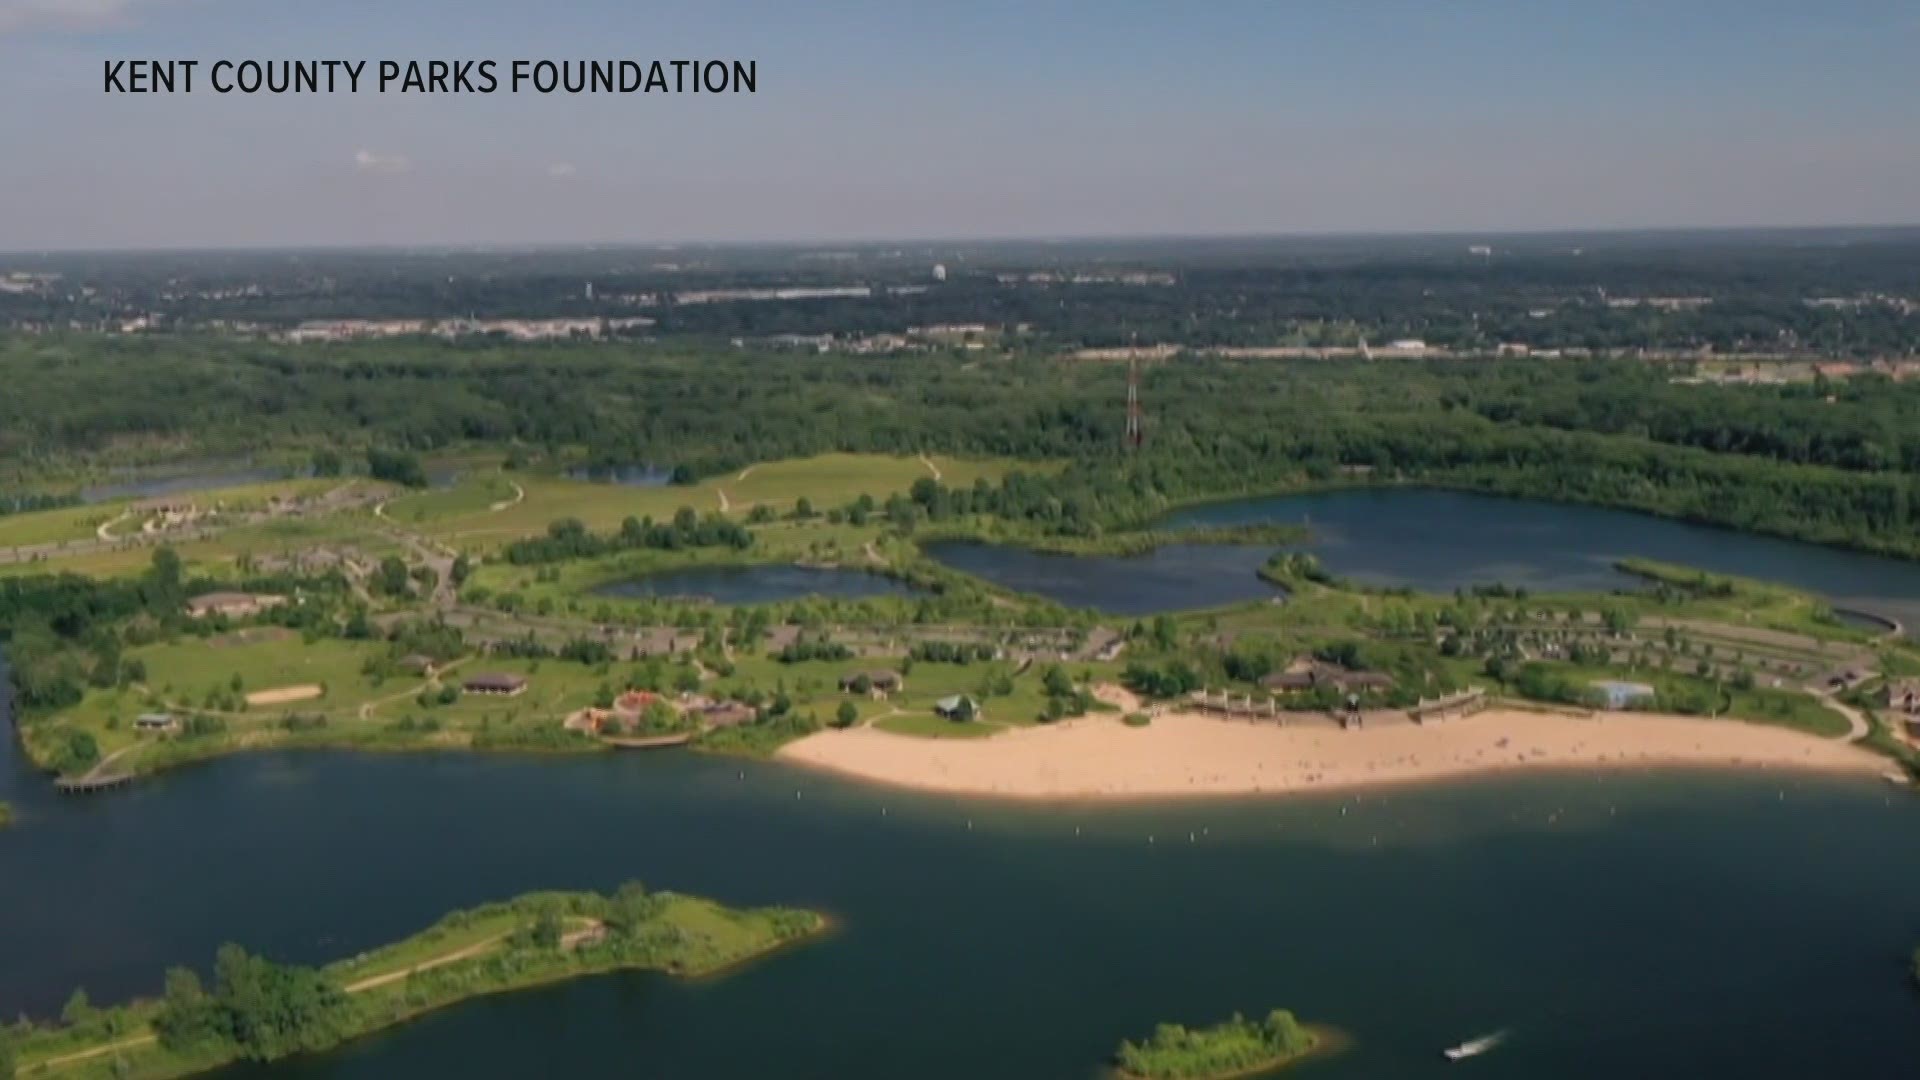 West Michigan Community Bank discuss the work of the Foundation and the gift of a thriving county parks system, supported by organizations like WMCB.